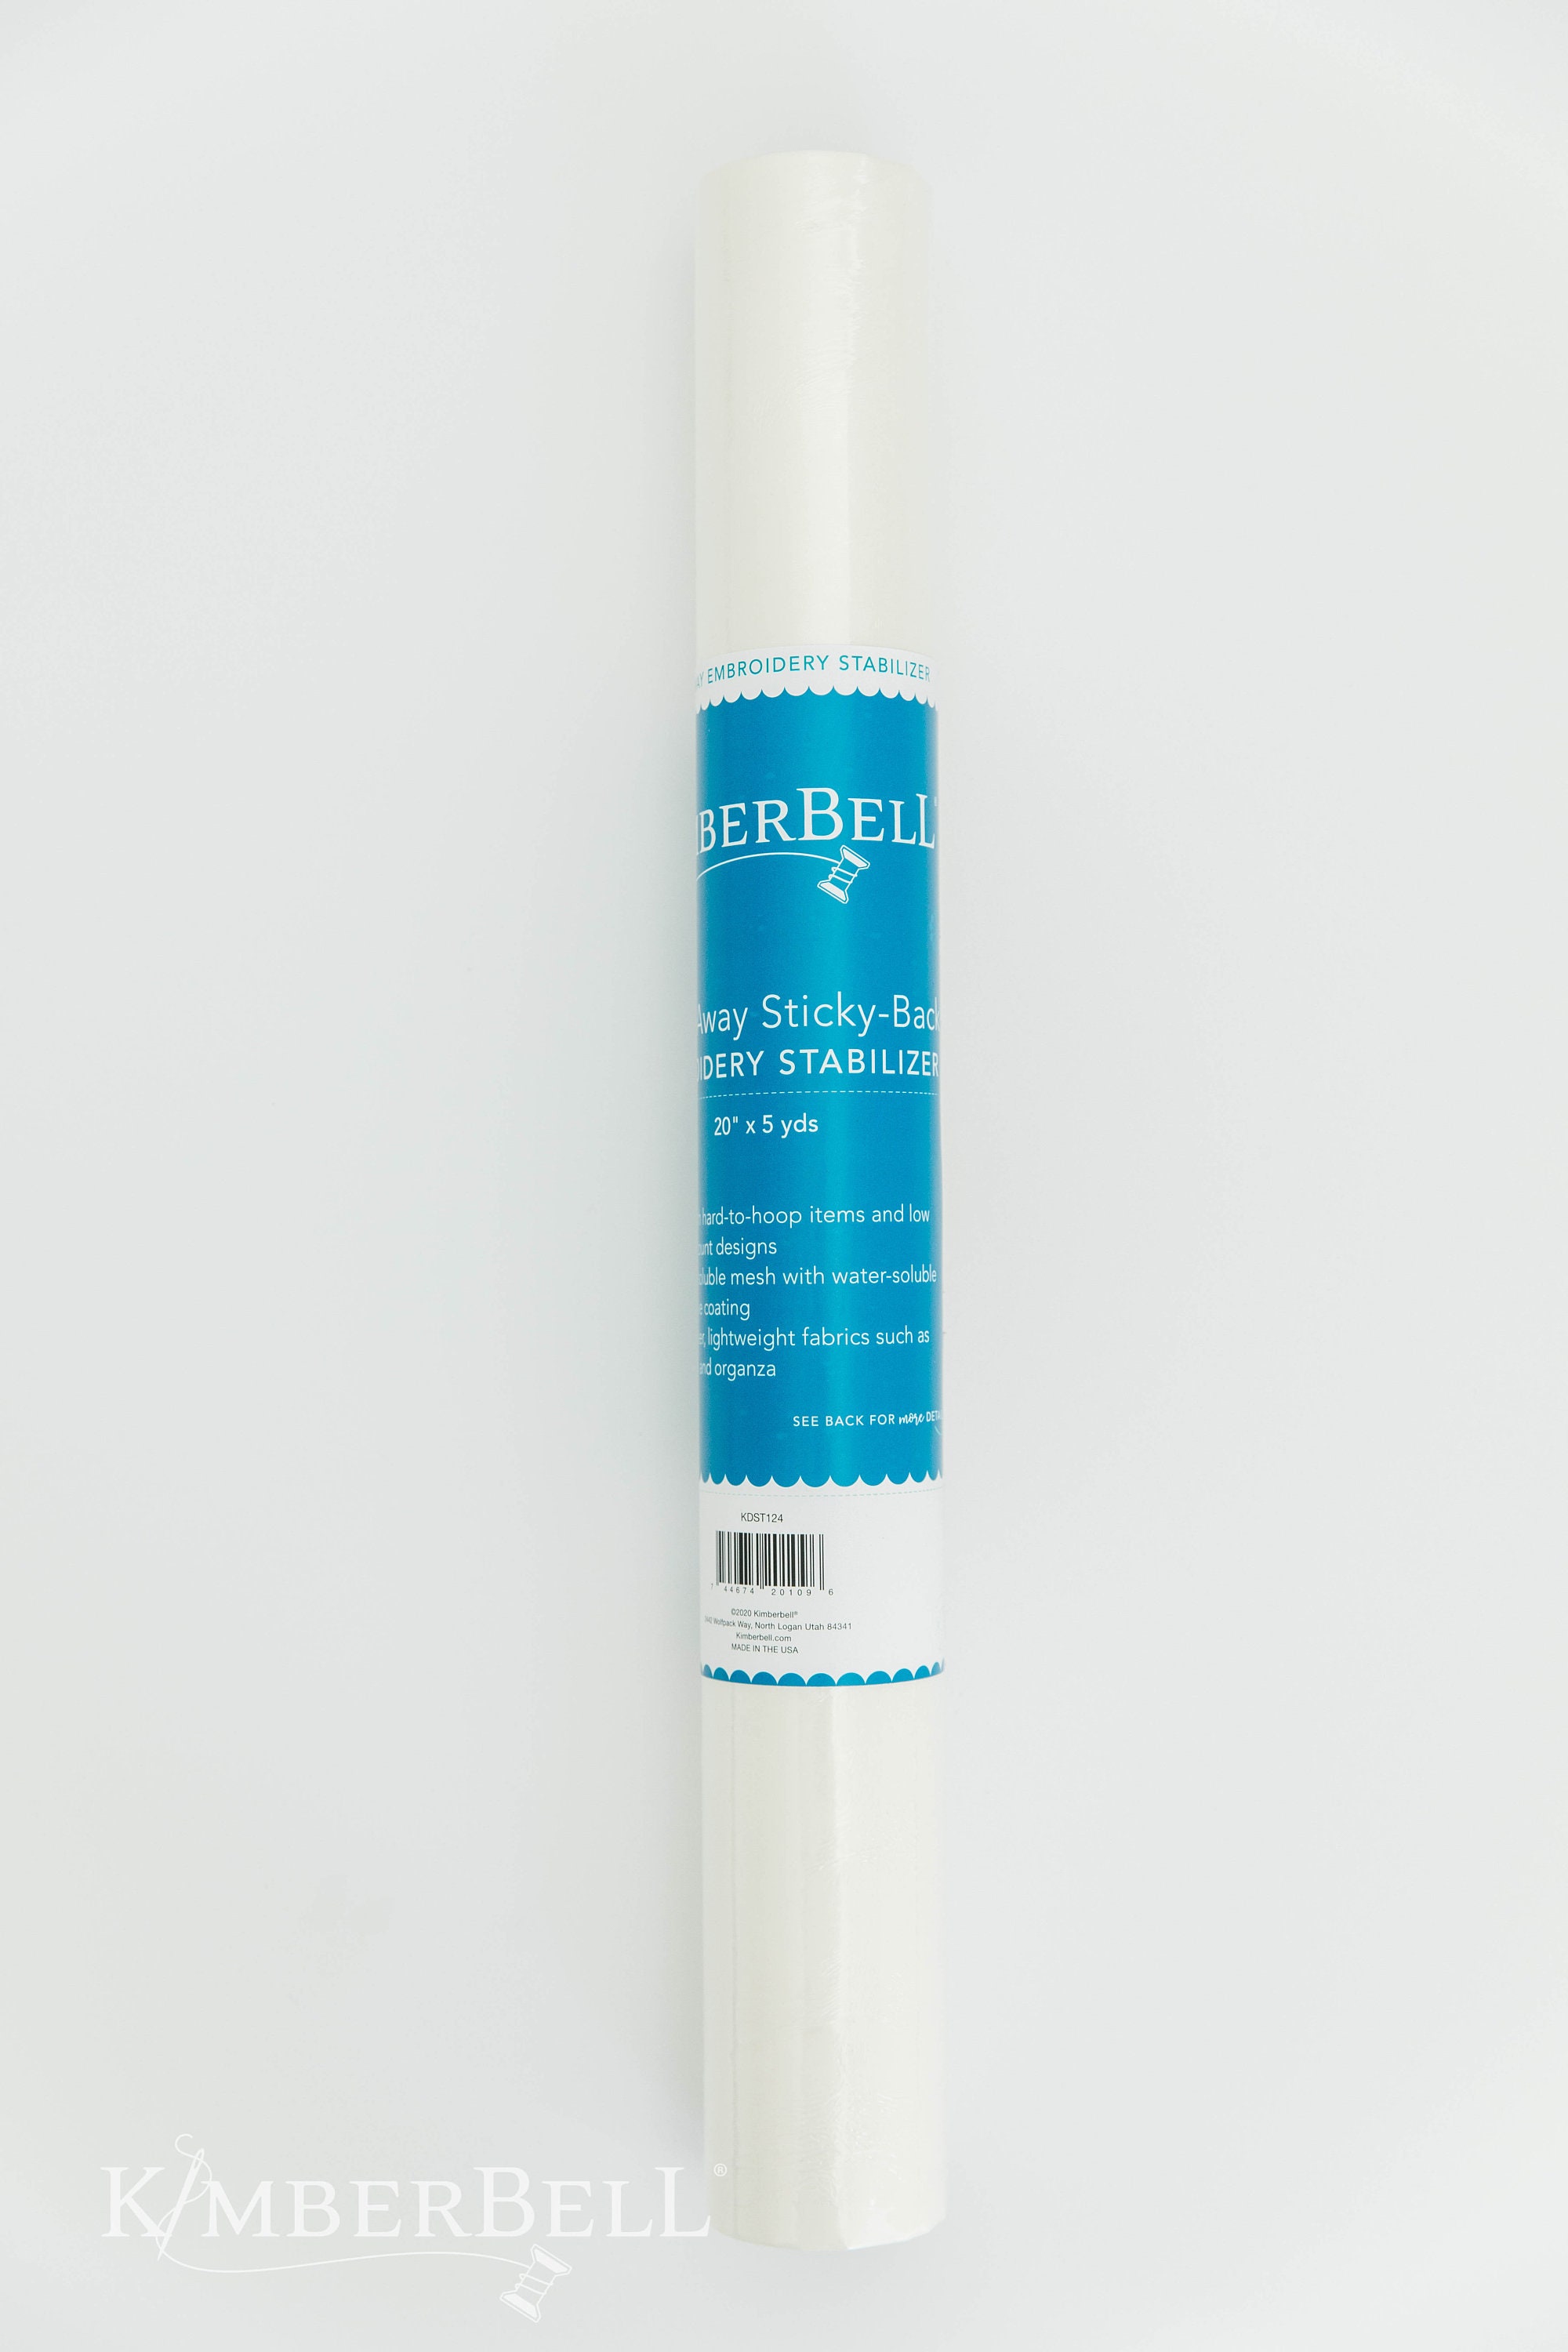 Sewline Water Soluble Glue Refill Blue 6 Pack